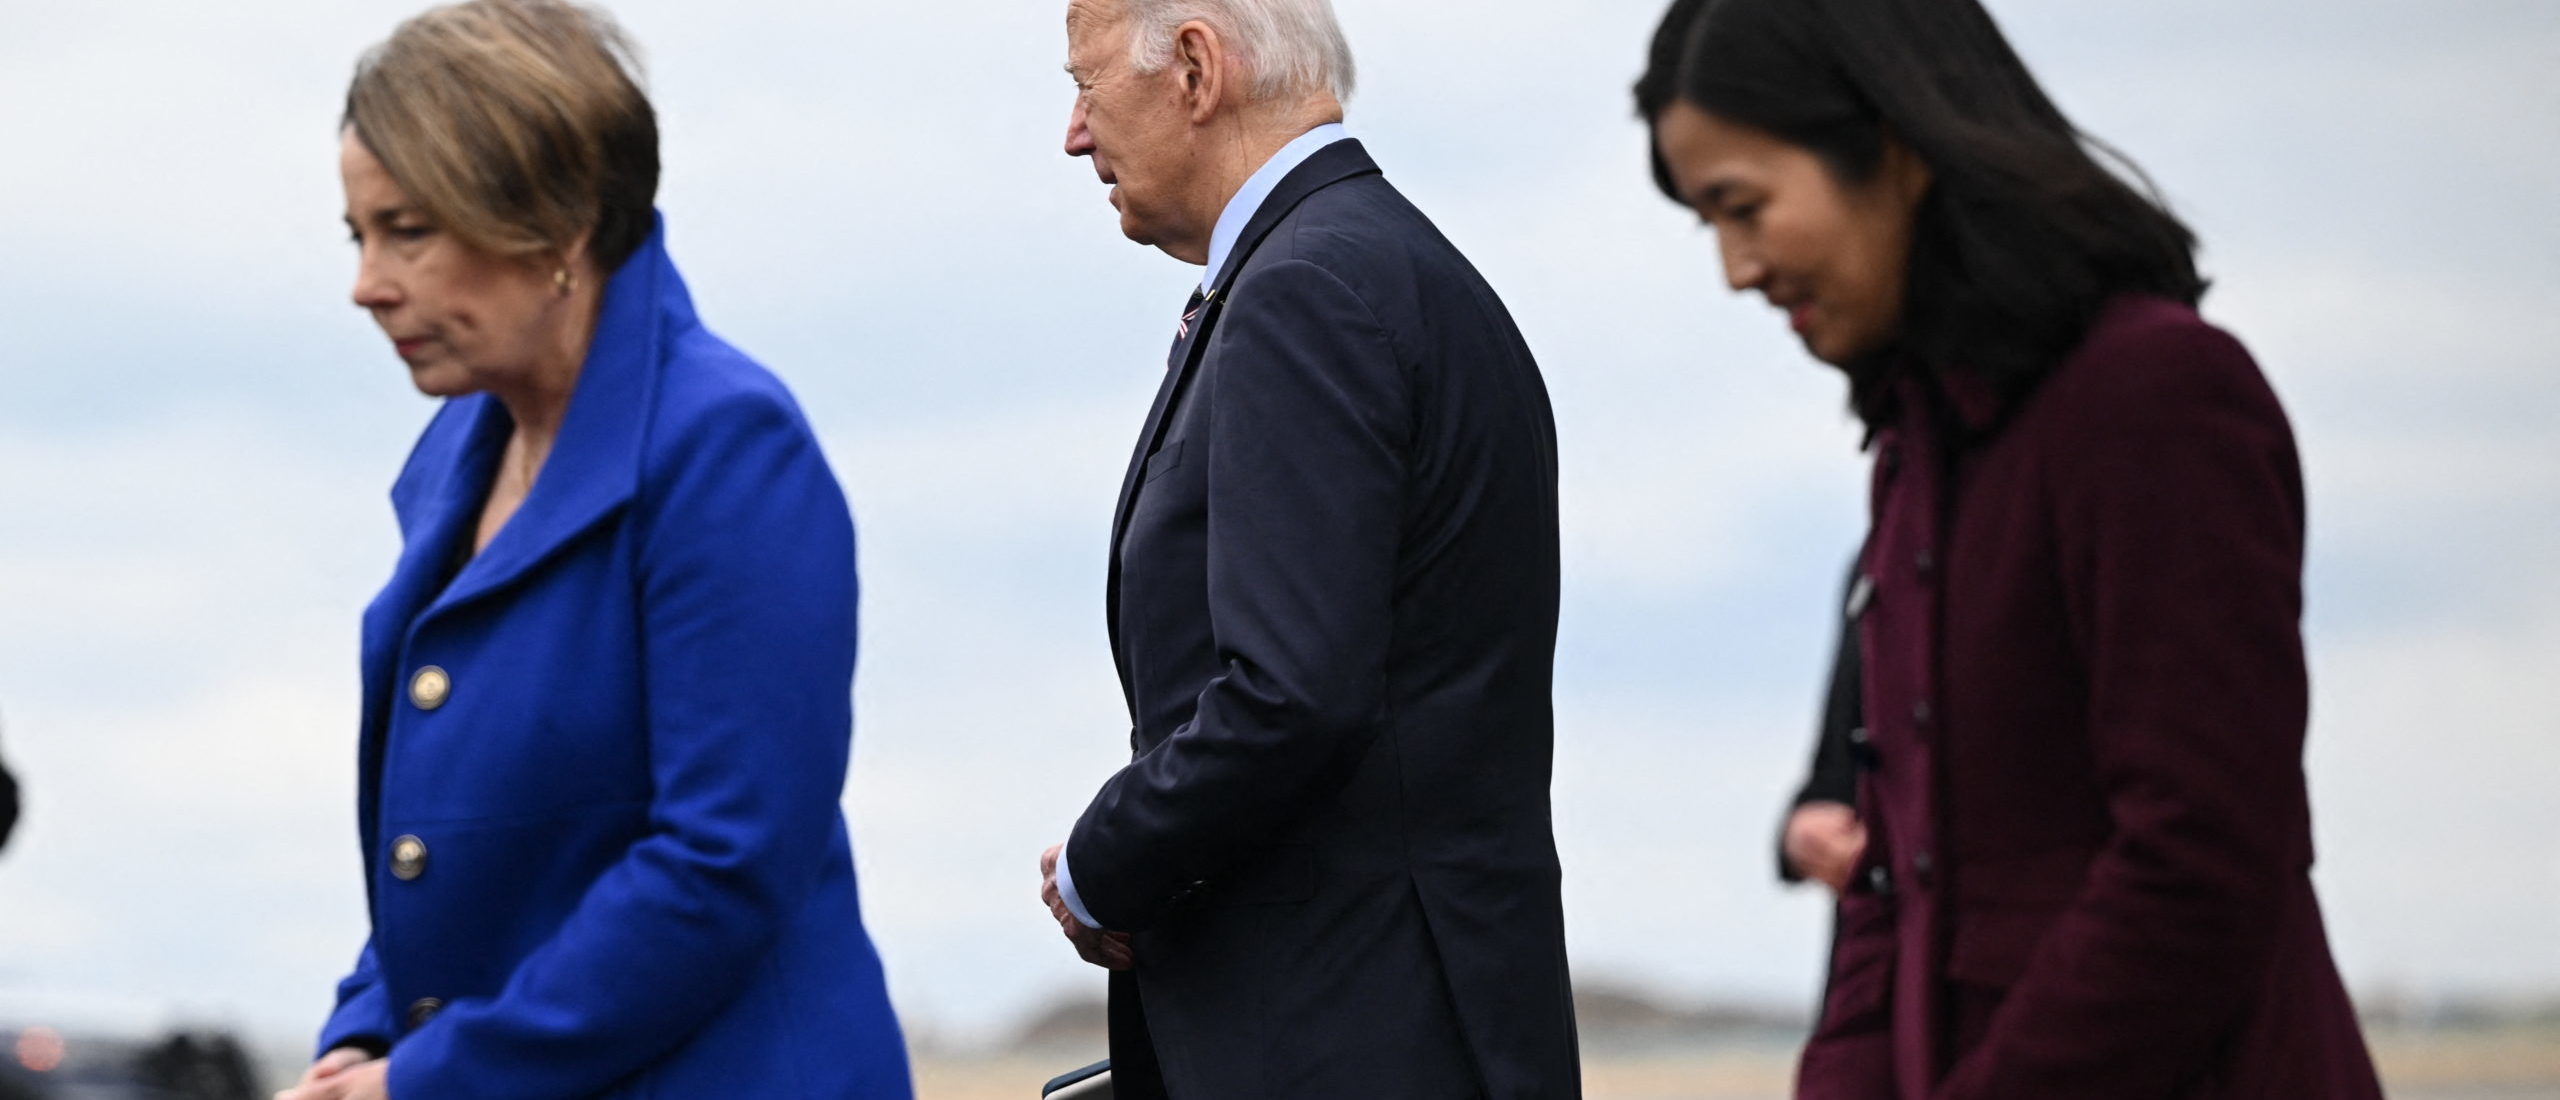 US President Joe Biden is greeted by Massachusetts Governor Maura Healy (L) and Boston Mayor Michelle Wu, as he disembarks Air Force One at Boston Logan International Airport in Boston, Massachusetts, on December 5, 2023. (Photo by MANDEL NGAN/AFP via Getty Images)